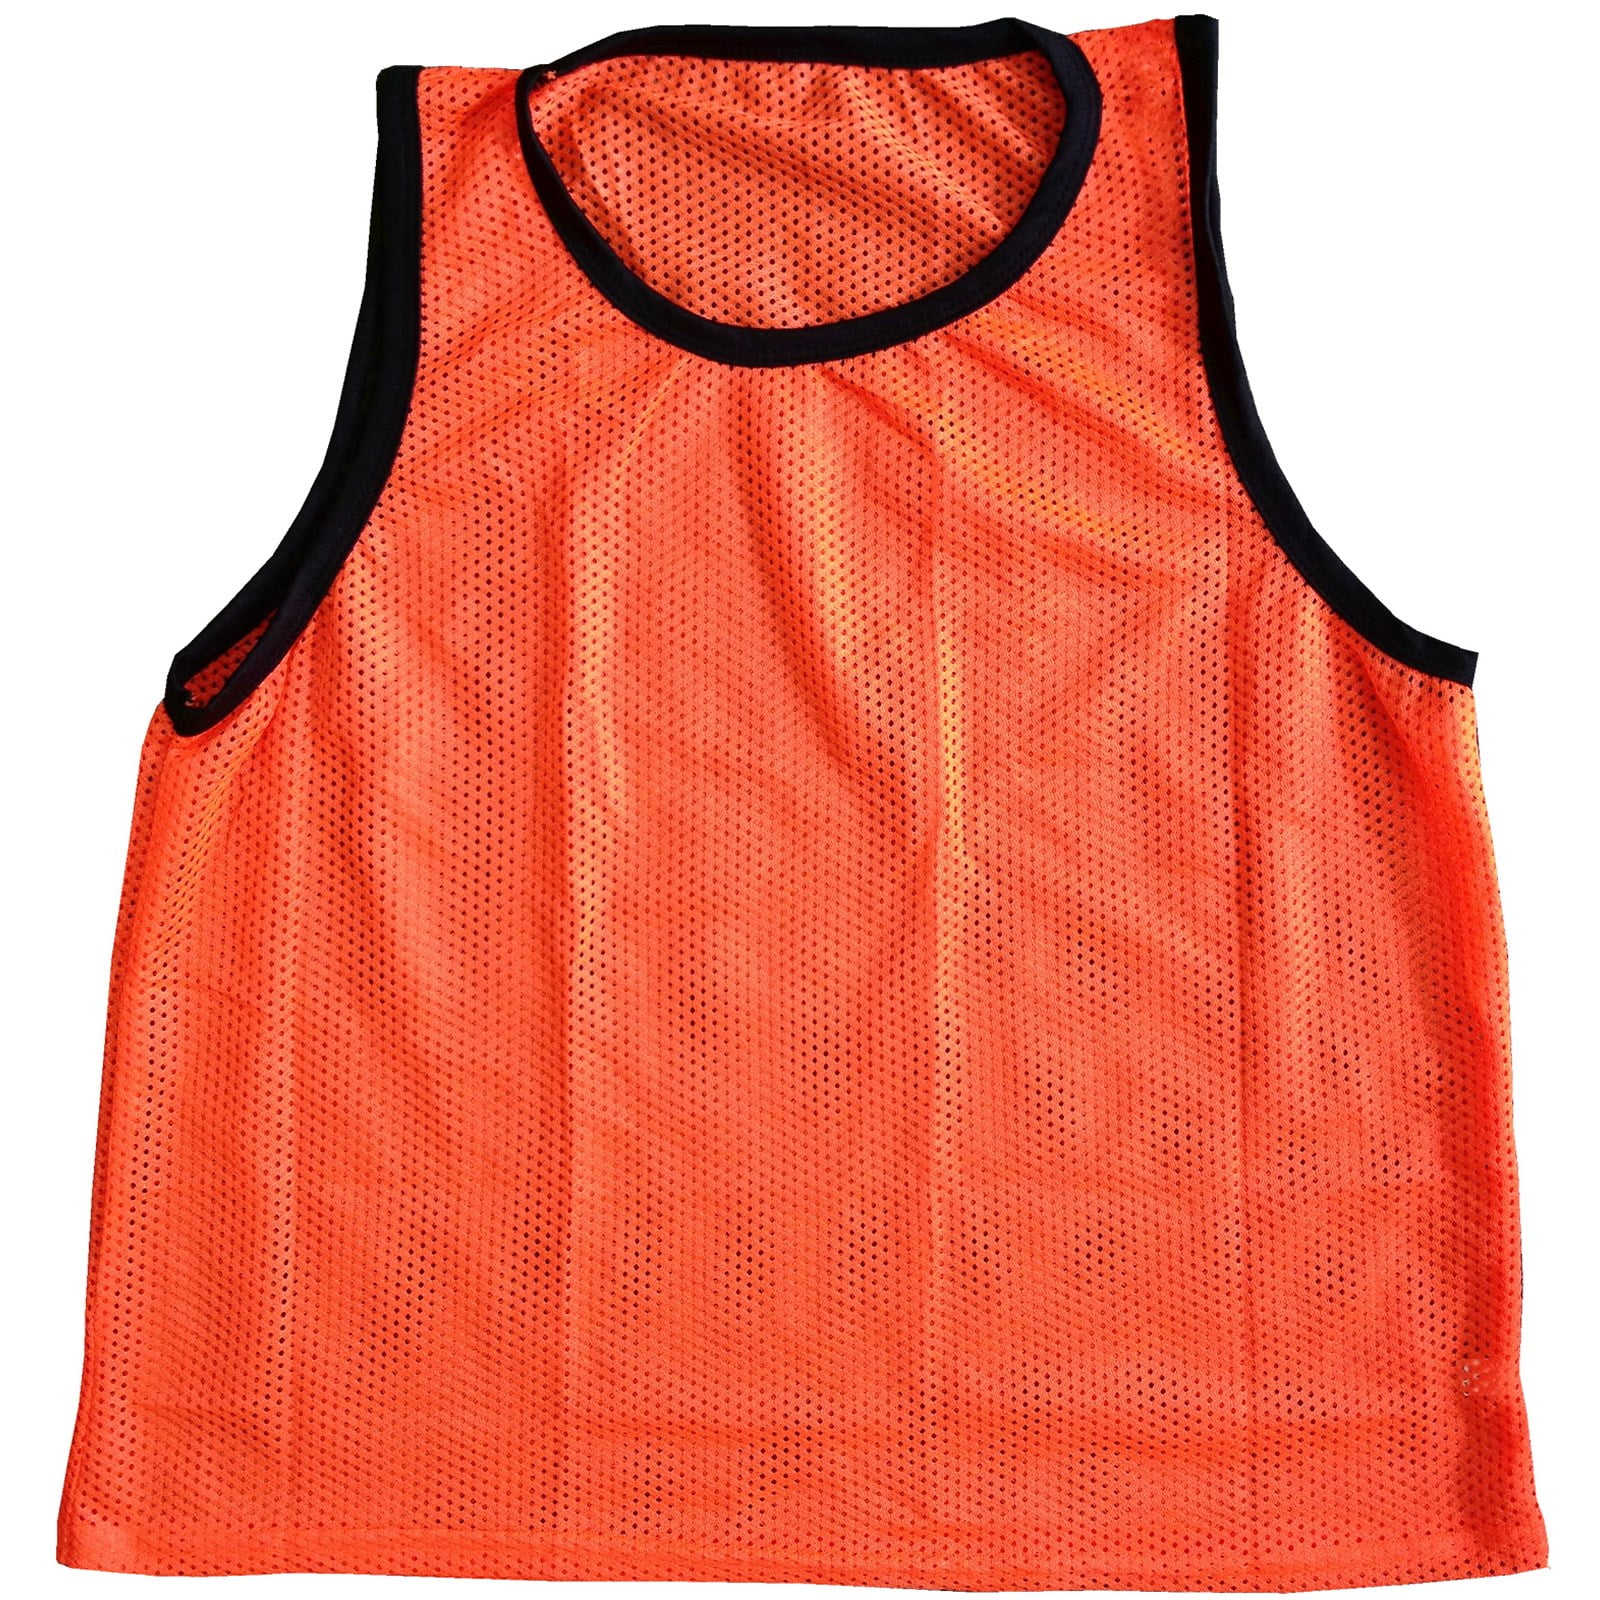 CHEAP SOCCER PINNIES MESH BIBS 6 QTY WORKOUTZ YOUTH SCRIMMAGE VESTS YELLOW 